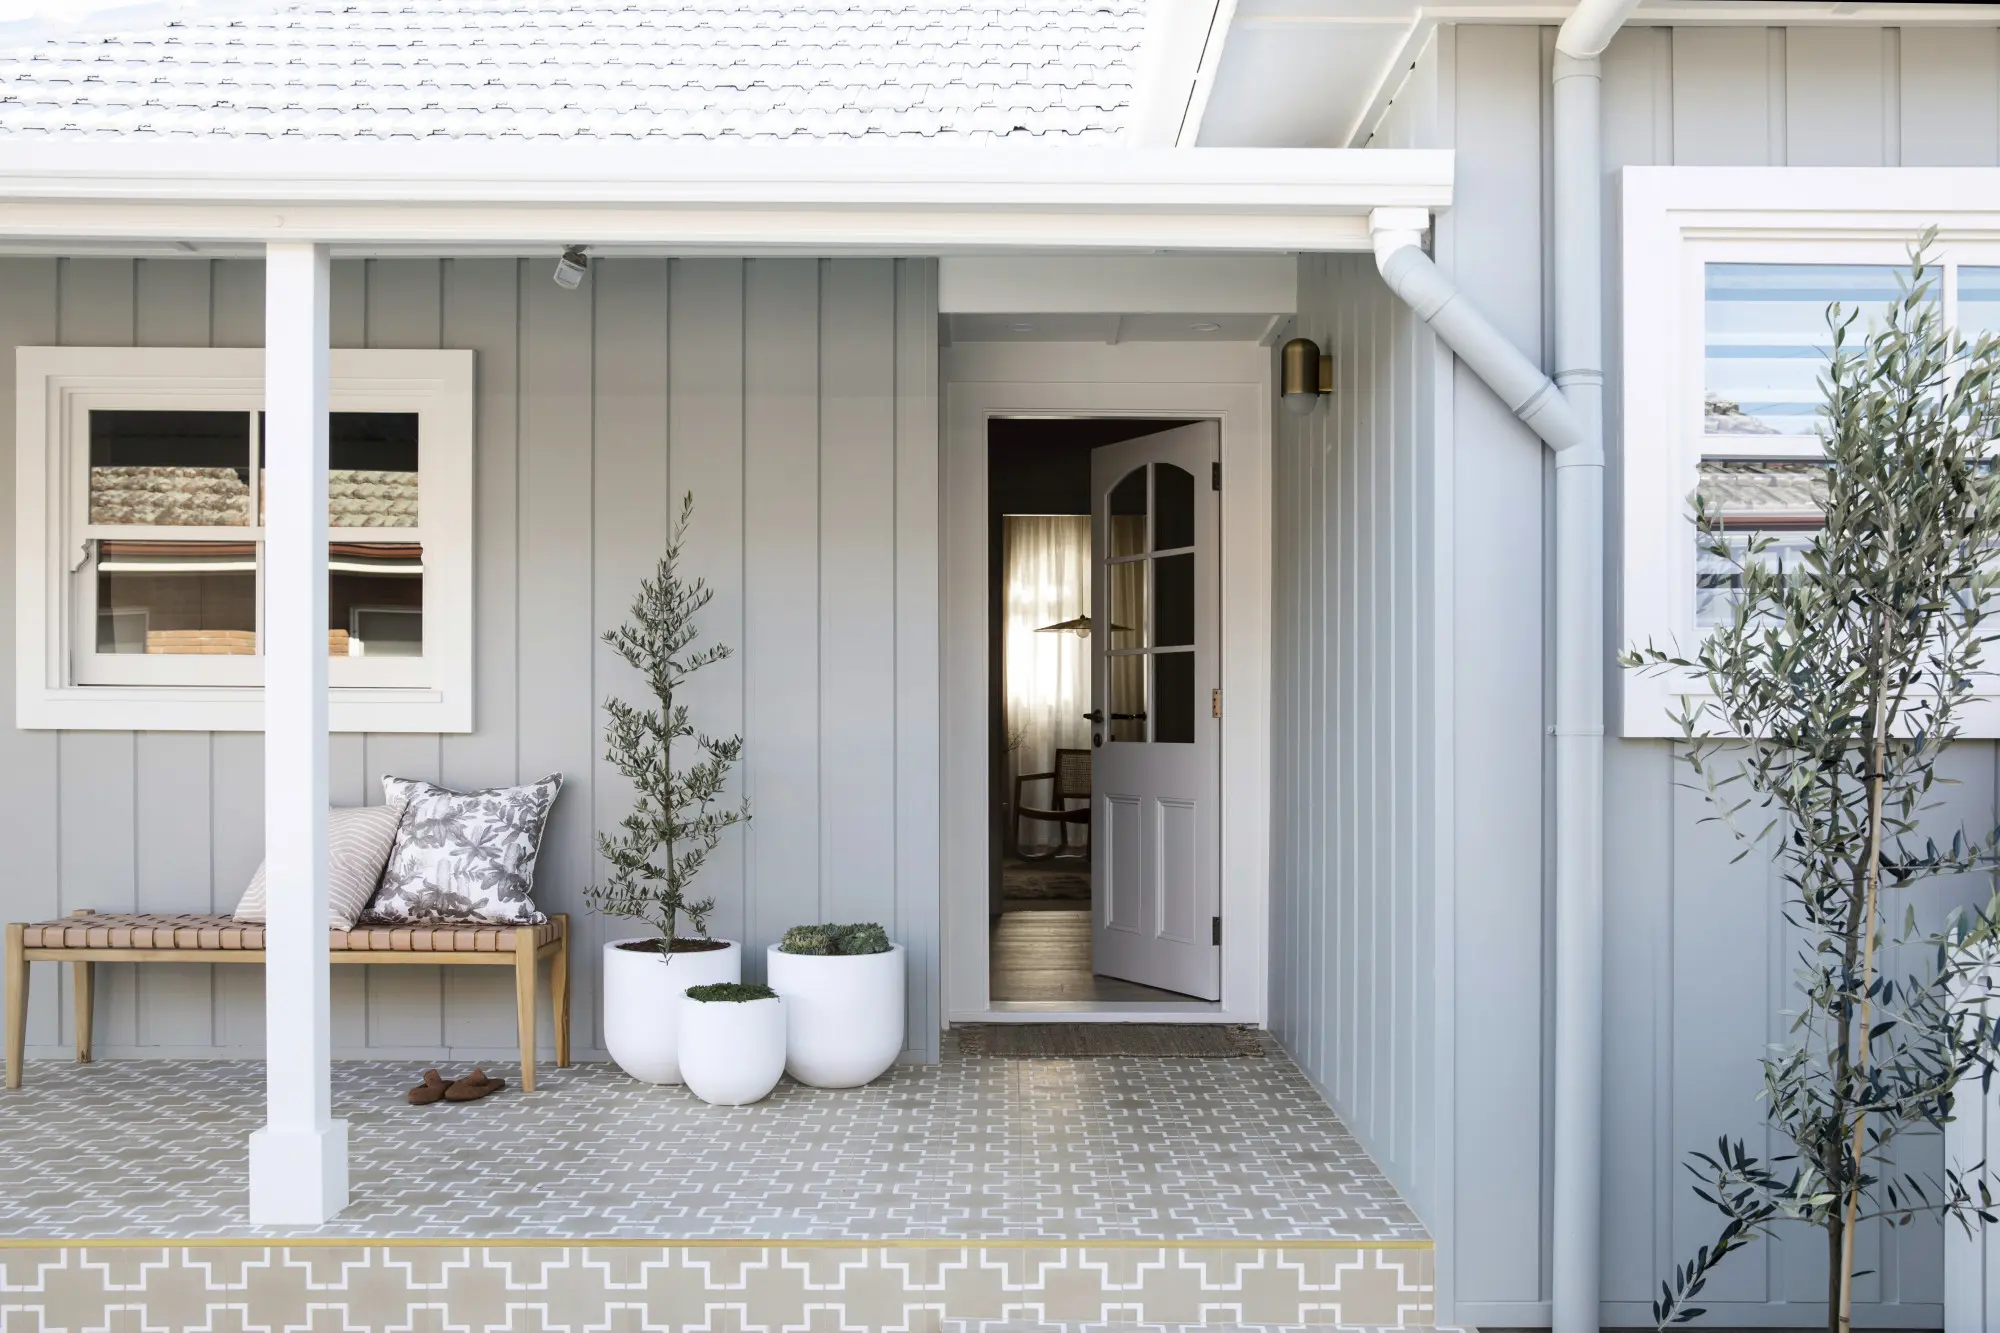 Grey house with white trim verandah and tiled patio